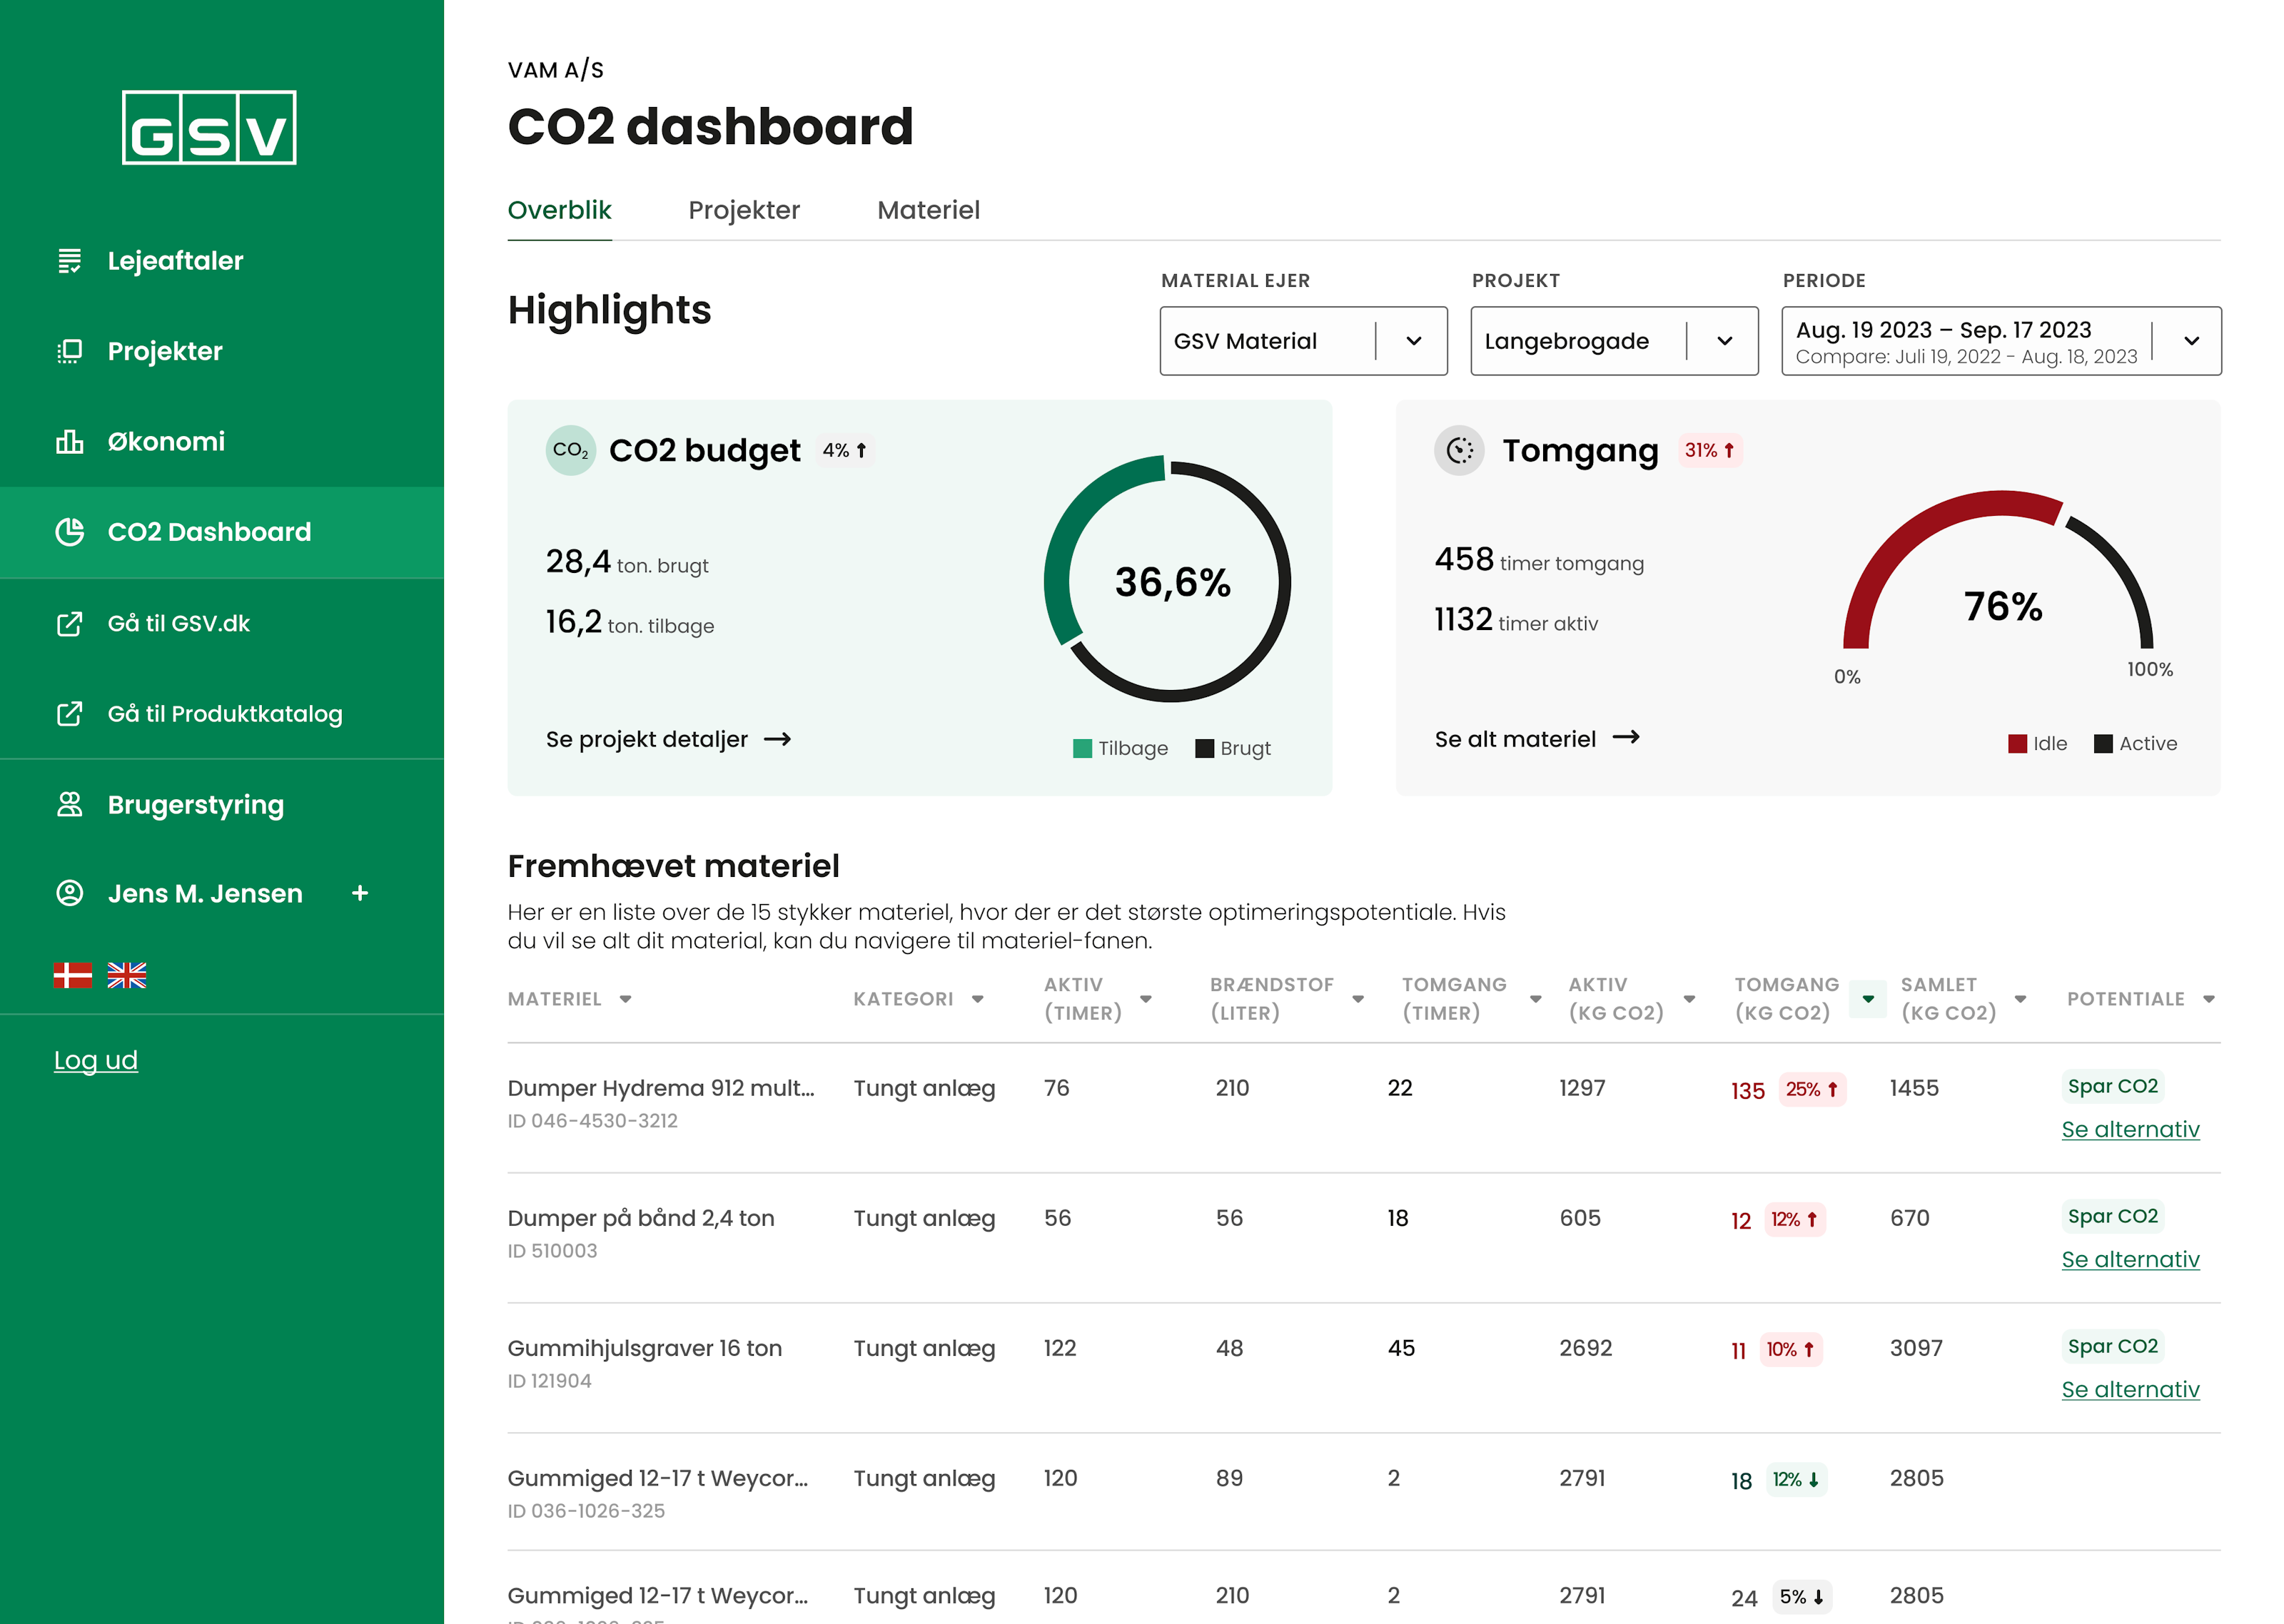 The CO2 Dashboard main page